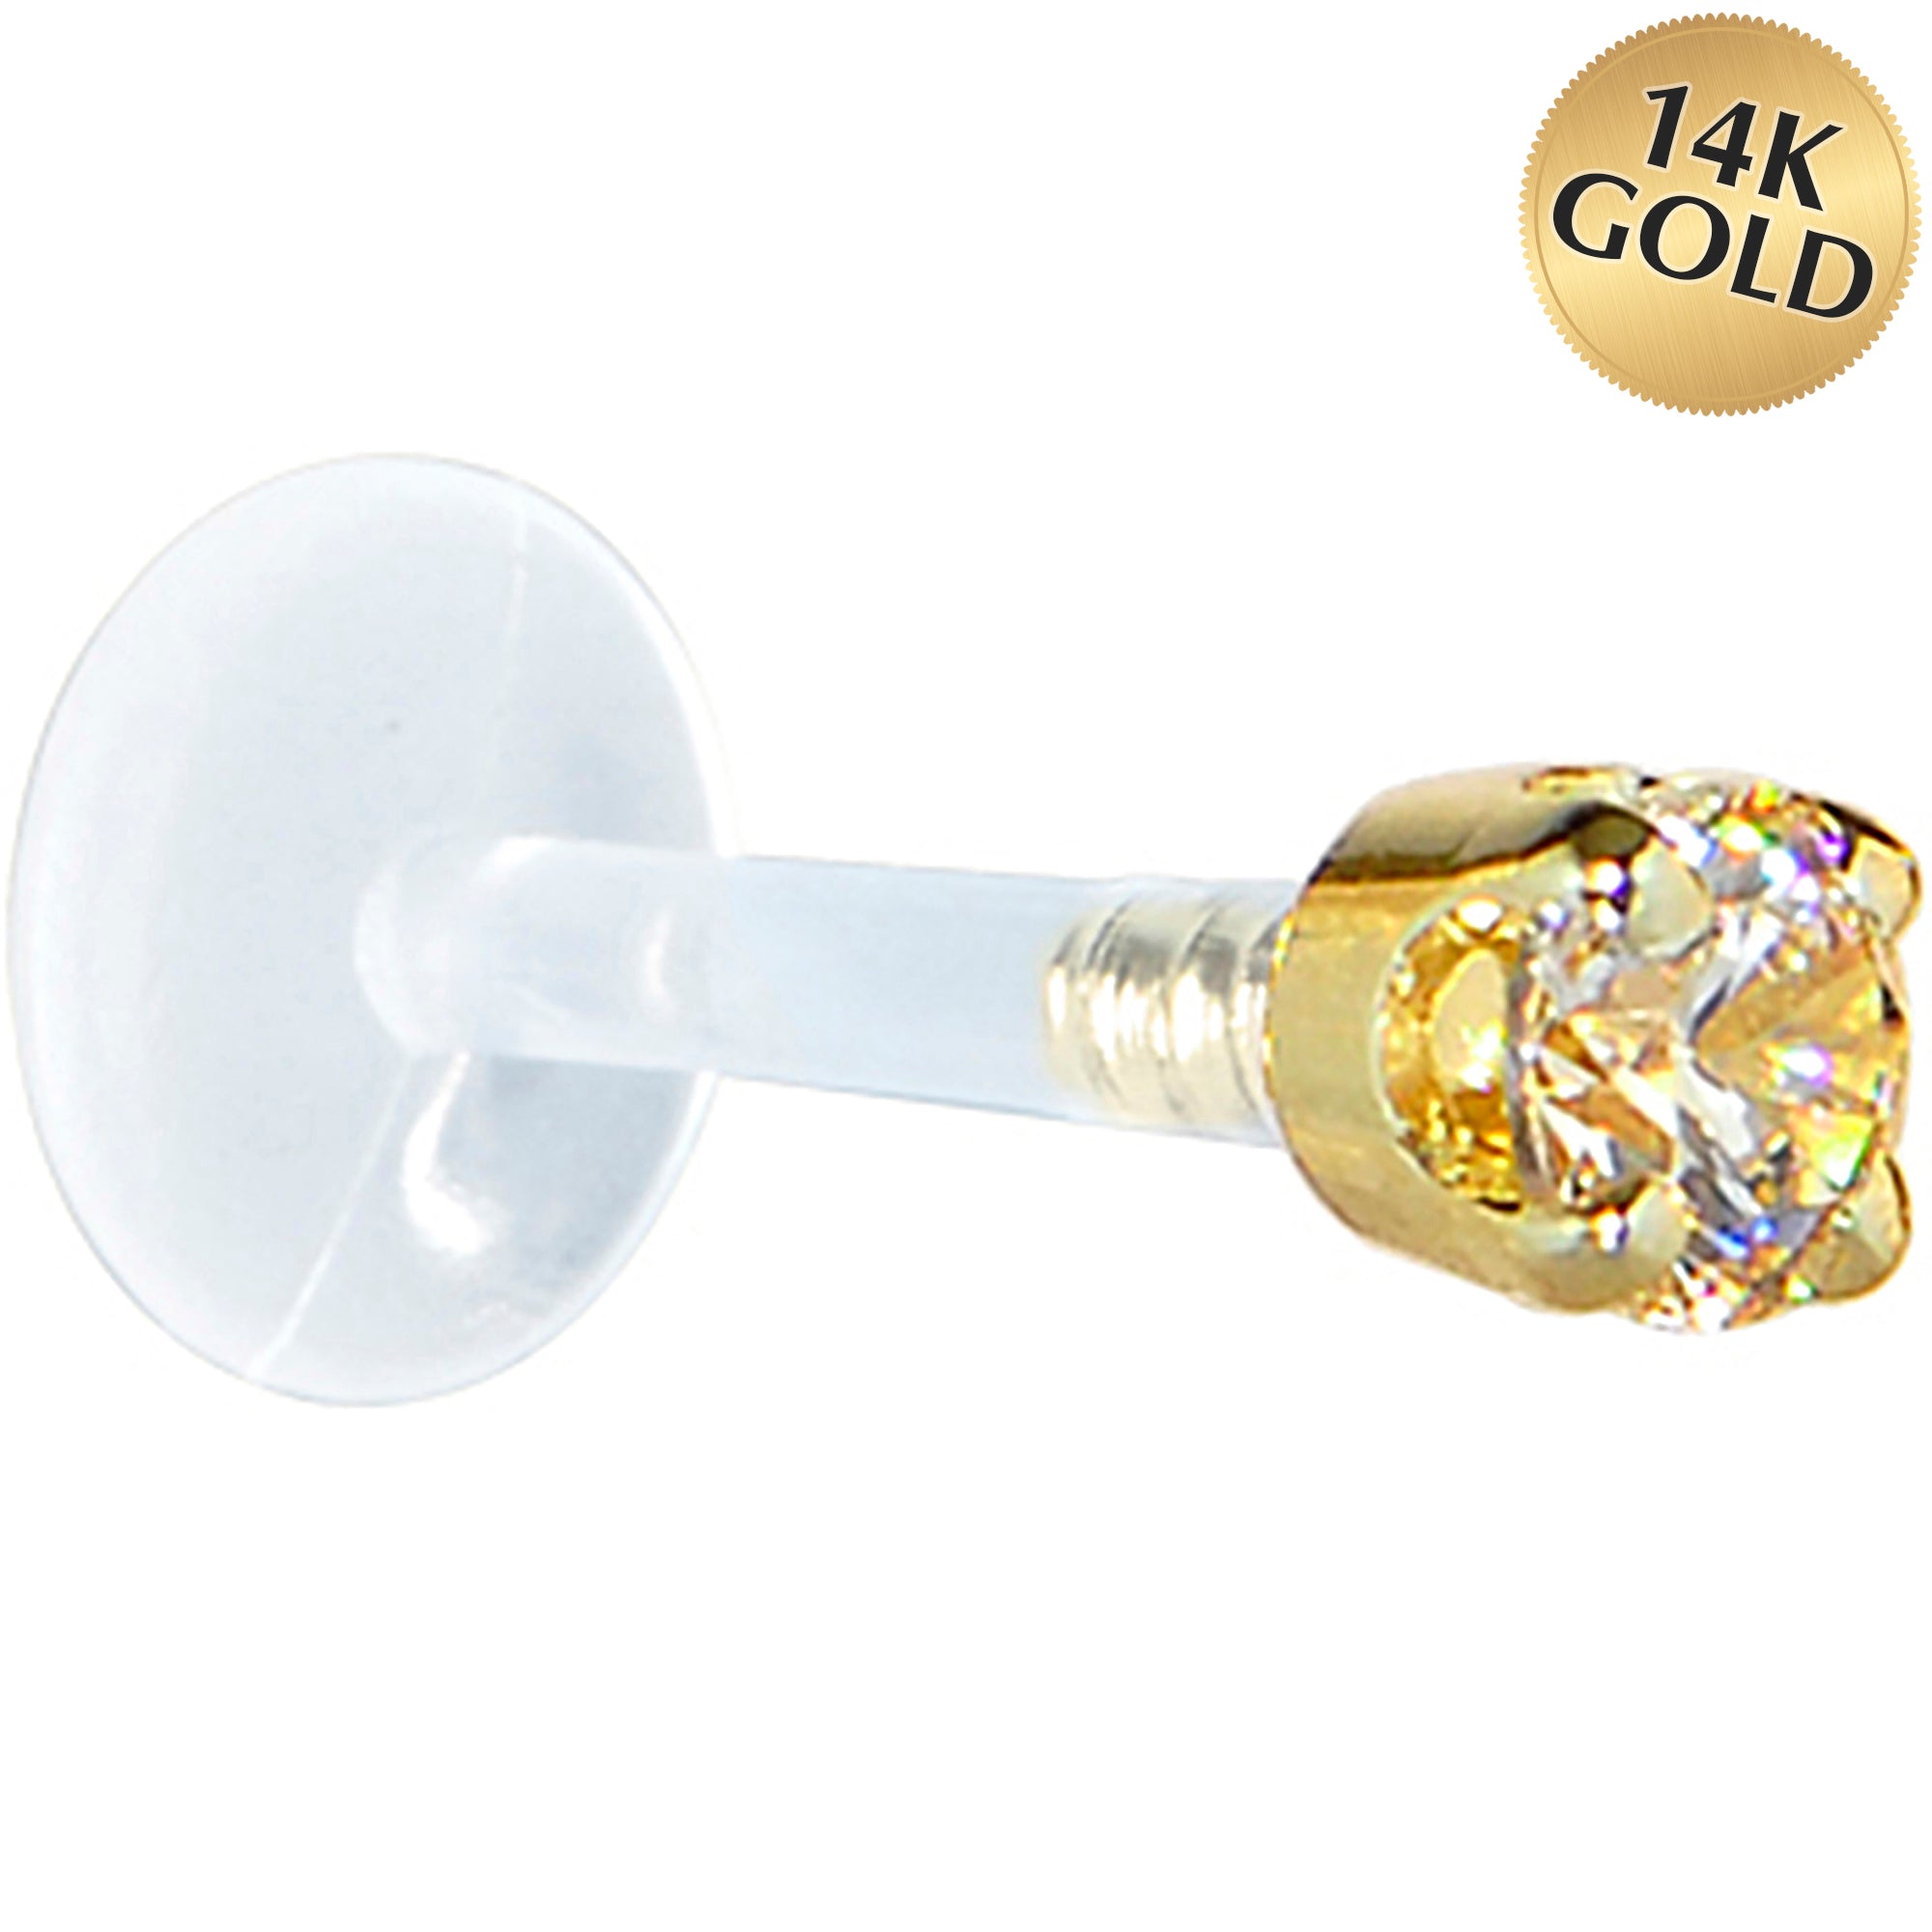 16 Gauge 1/4 Solid 14KT Yellow Gold 3mm Champagne Cubic Zirconia Bioplast Tragus Earring Stud